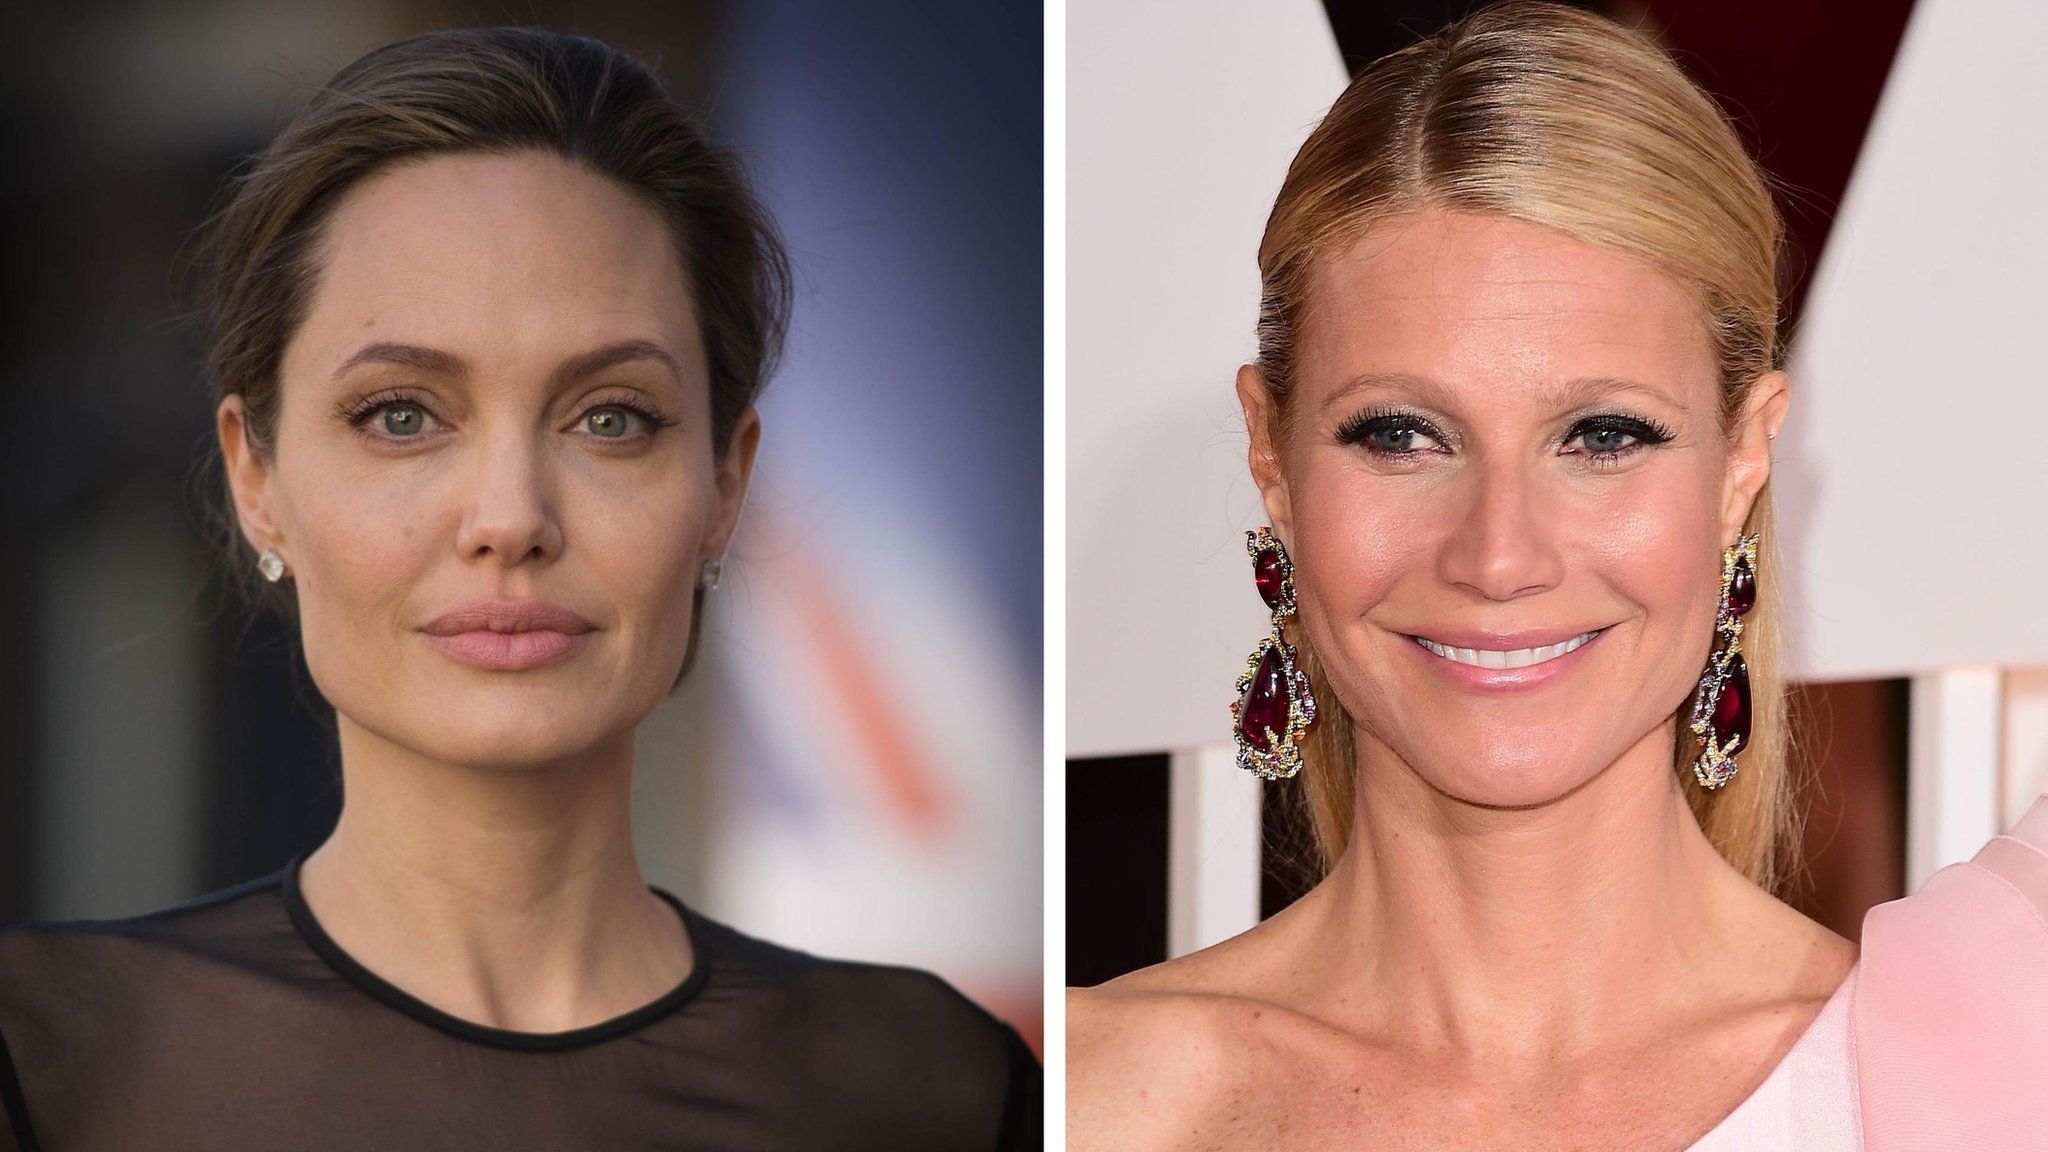 Undated file photos of Angelina Jolie (left) and Gwyneth Paltrow who are the latest actresses to accuse film producer Harvey Weinstein of sexual harassment.